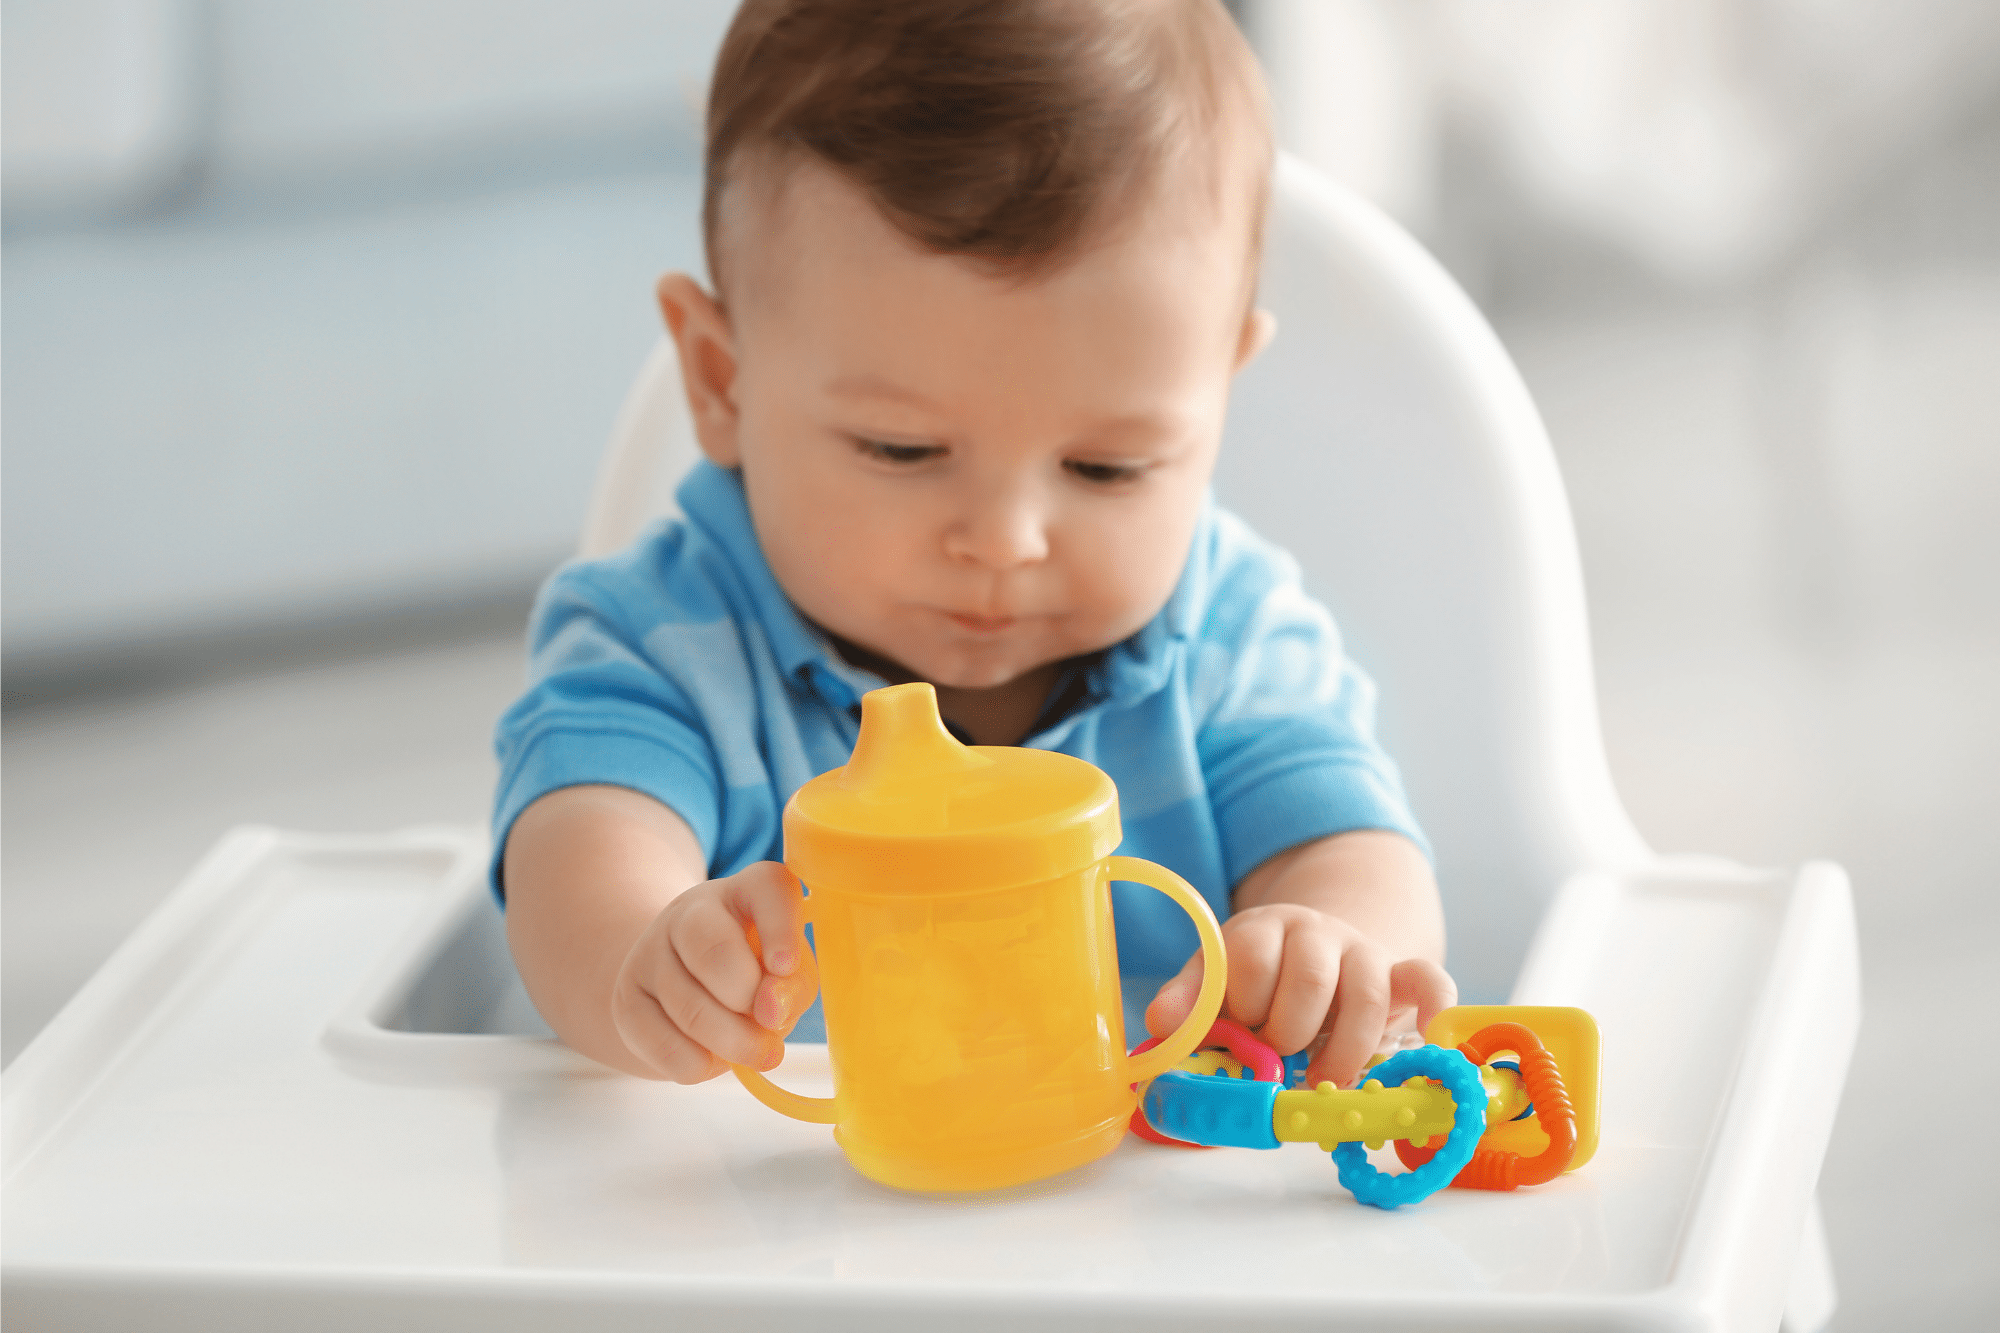 https://www.pedpartners.com/wp-content/uploads/baby-with-sippy-cup.png